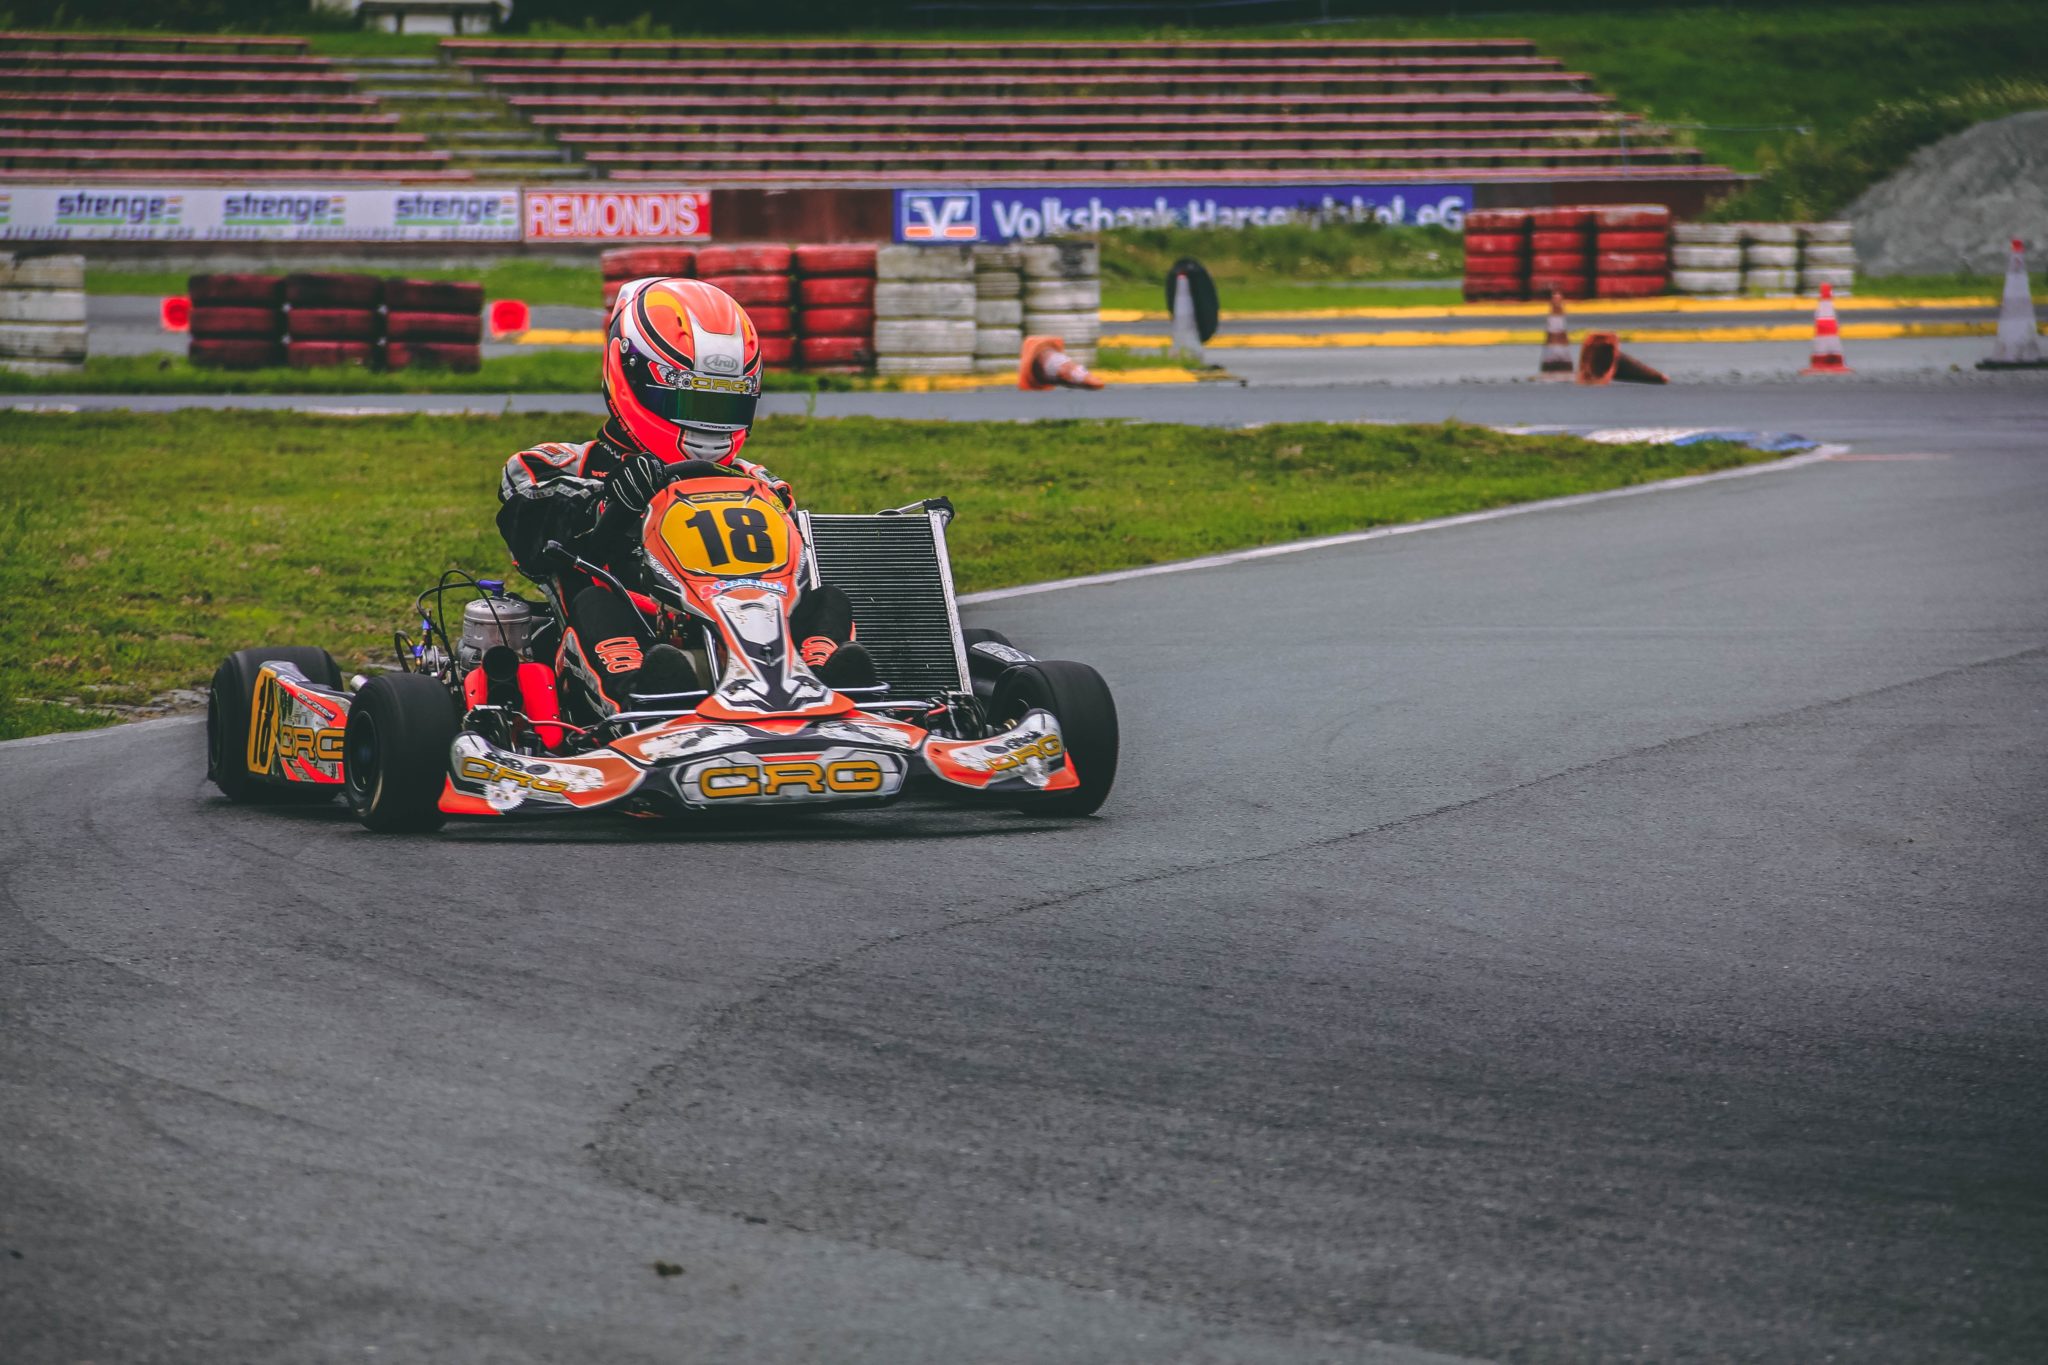 Speed along the track with outdoor karting in Barcelona